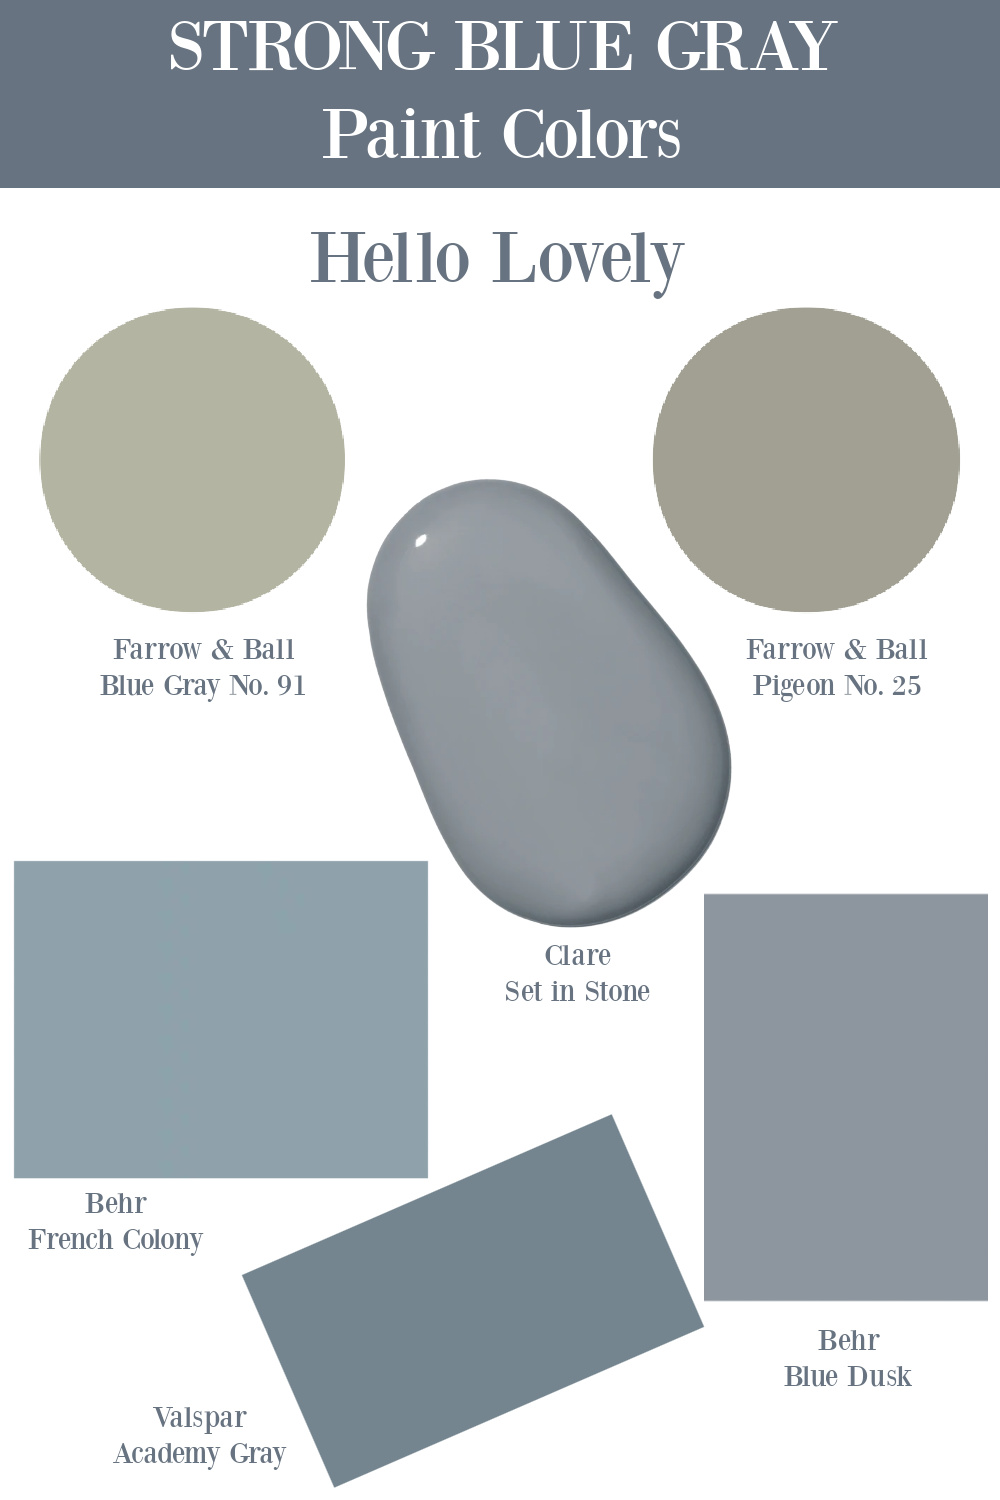 Strong Blue Gray Paint Colors on Hello Lovely Studio. #bluegray #paintcolors